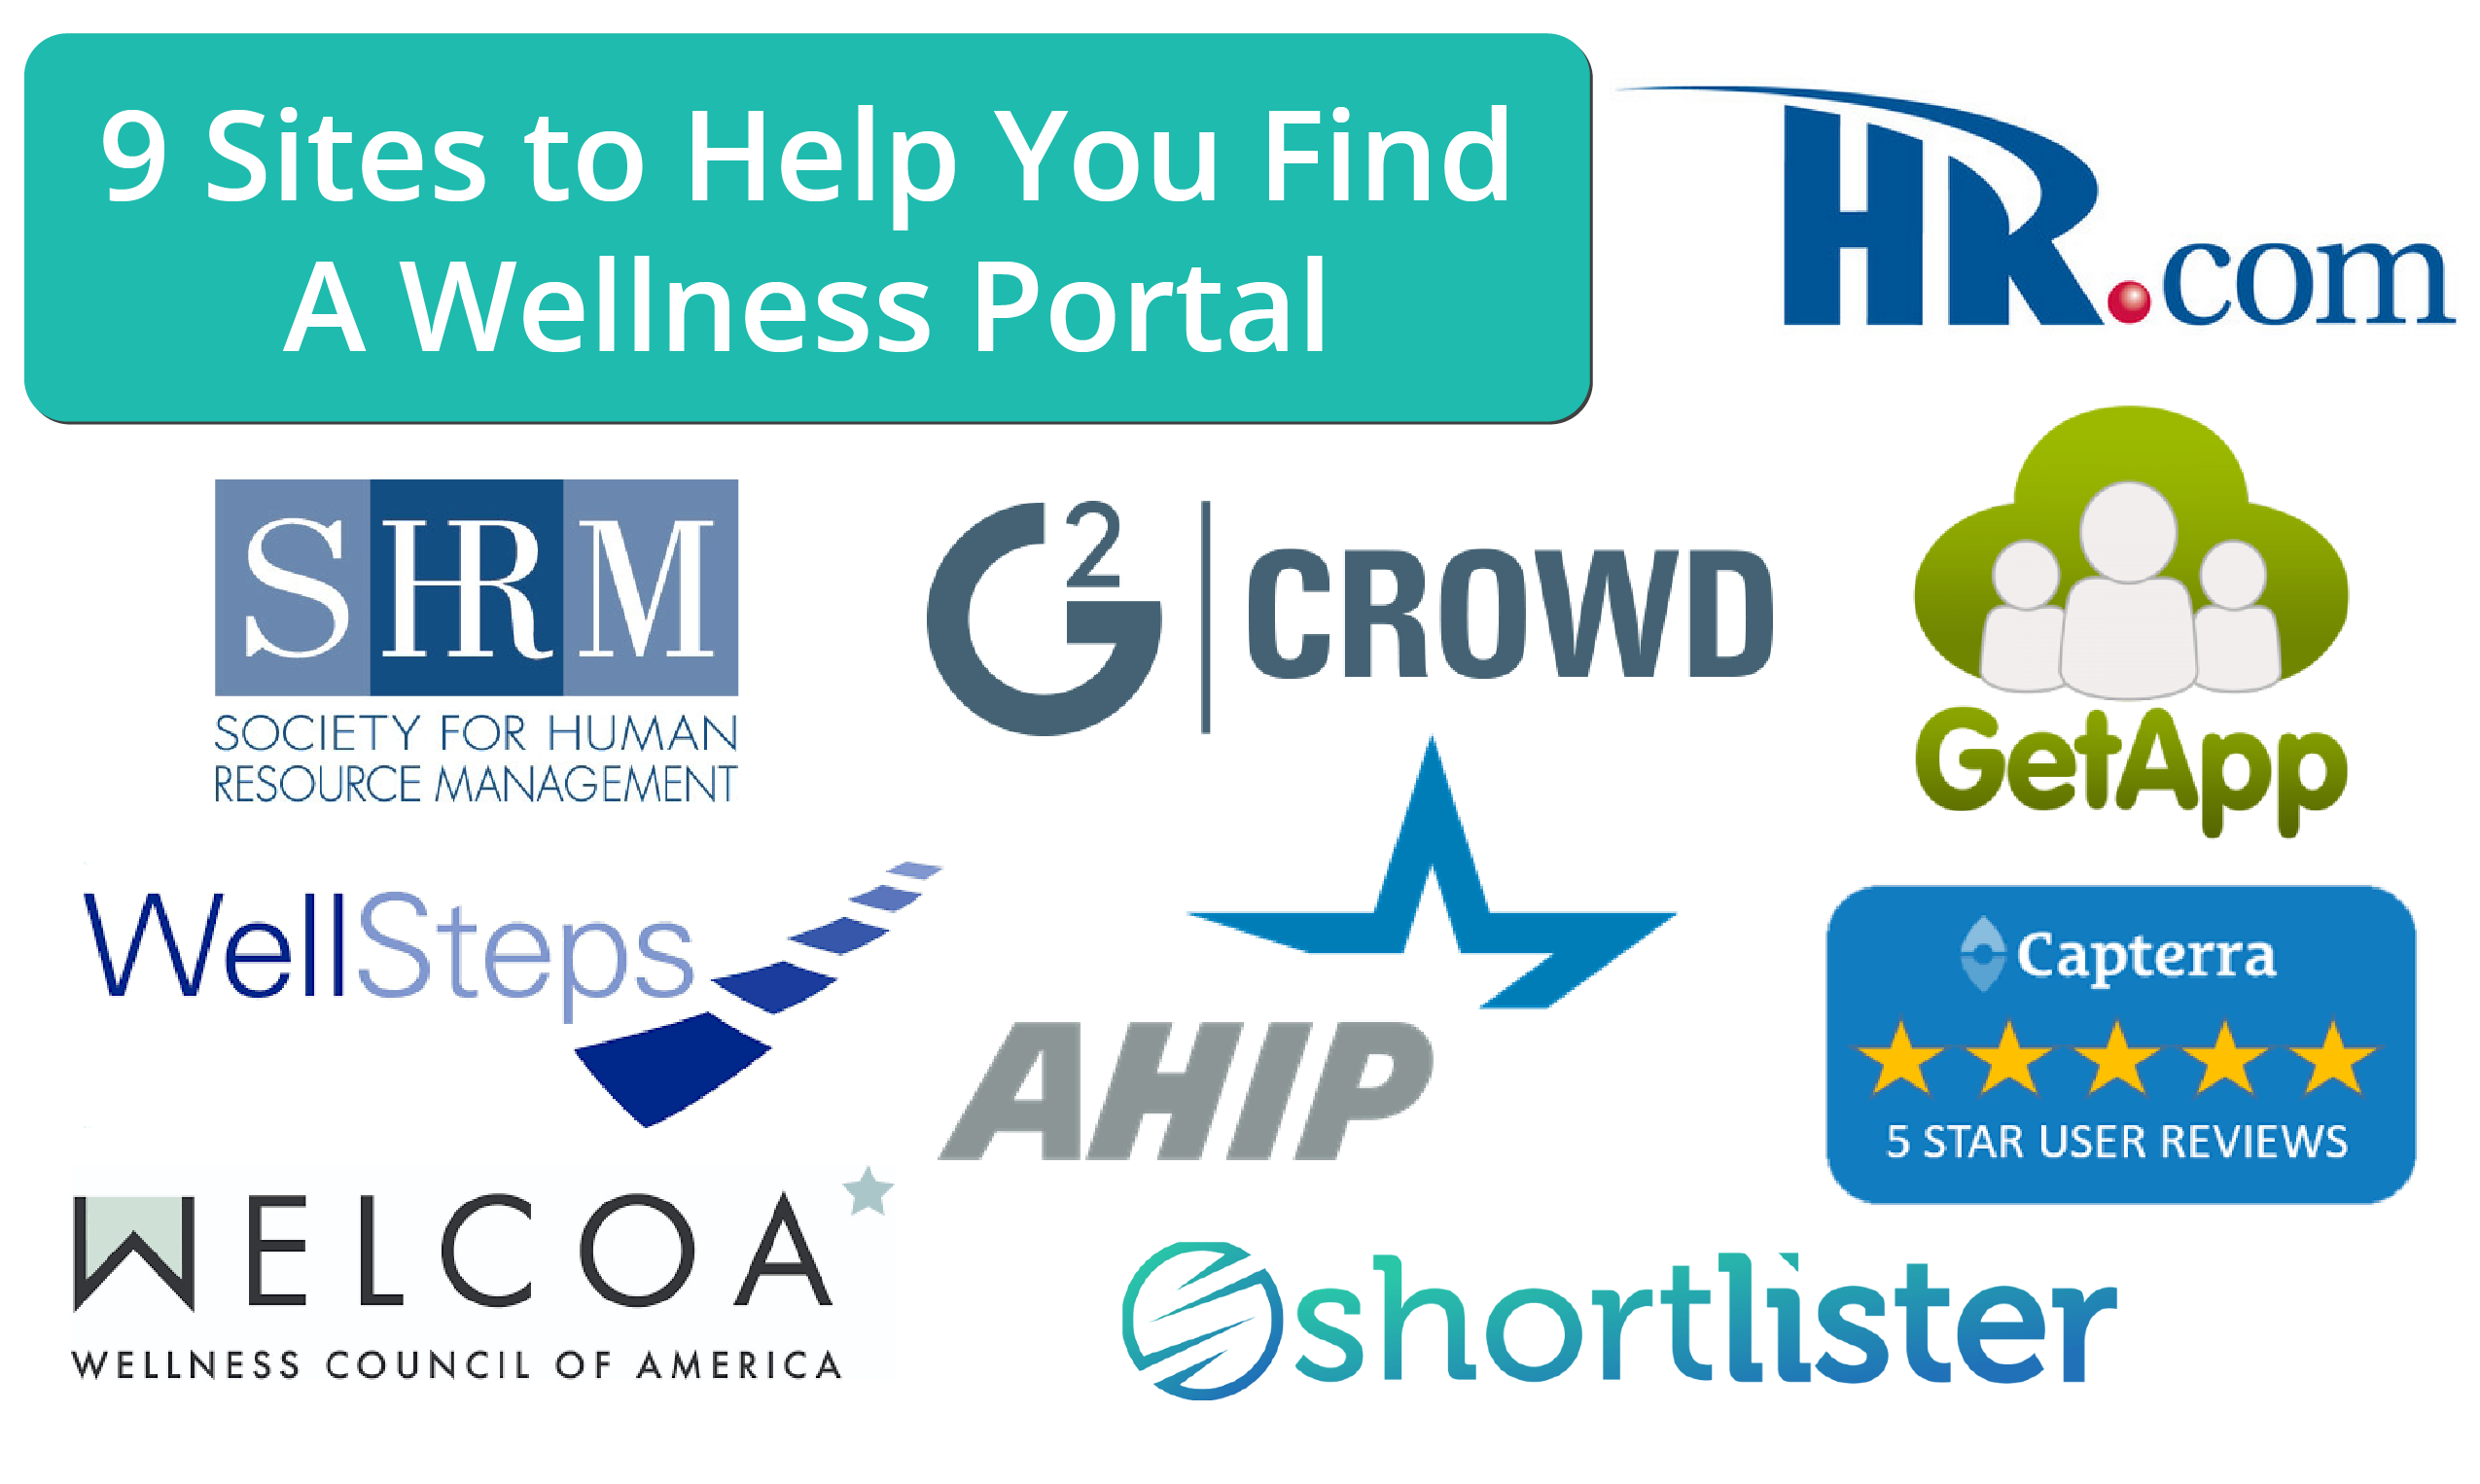 9 Sites to Help FInd A Wellness Portal-01